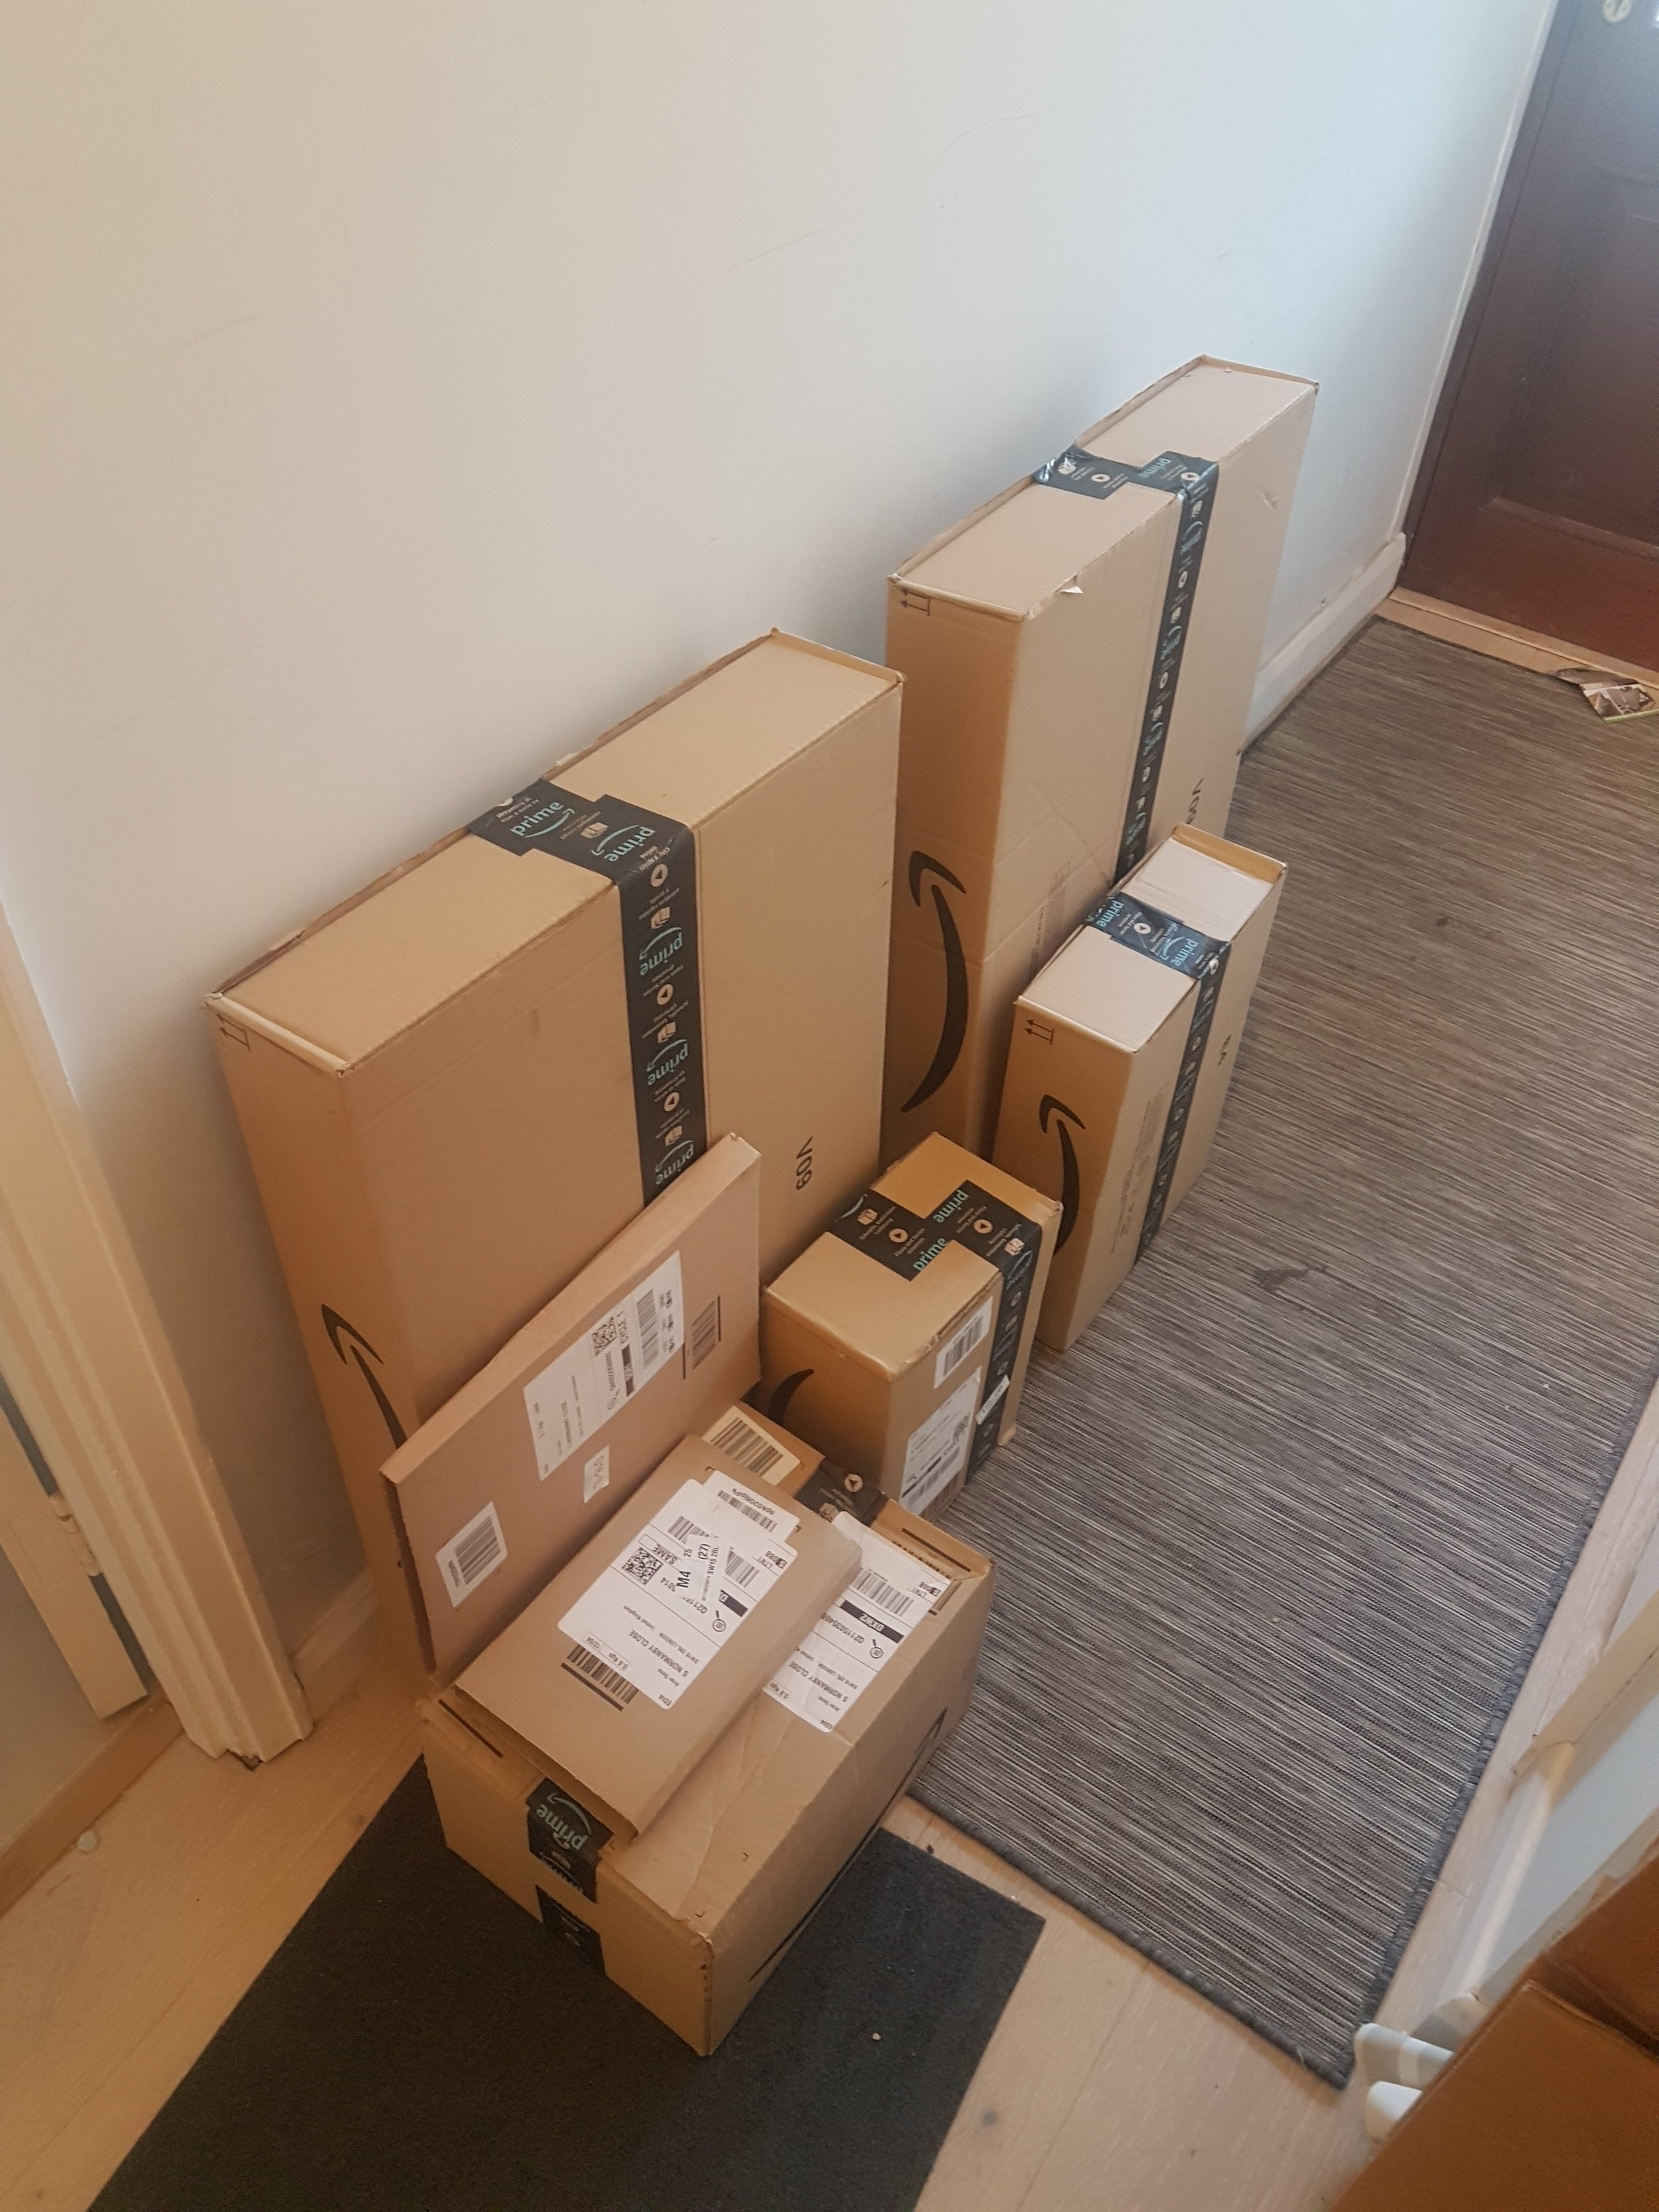 It began with a parcel invasion...